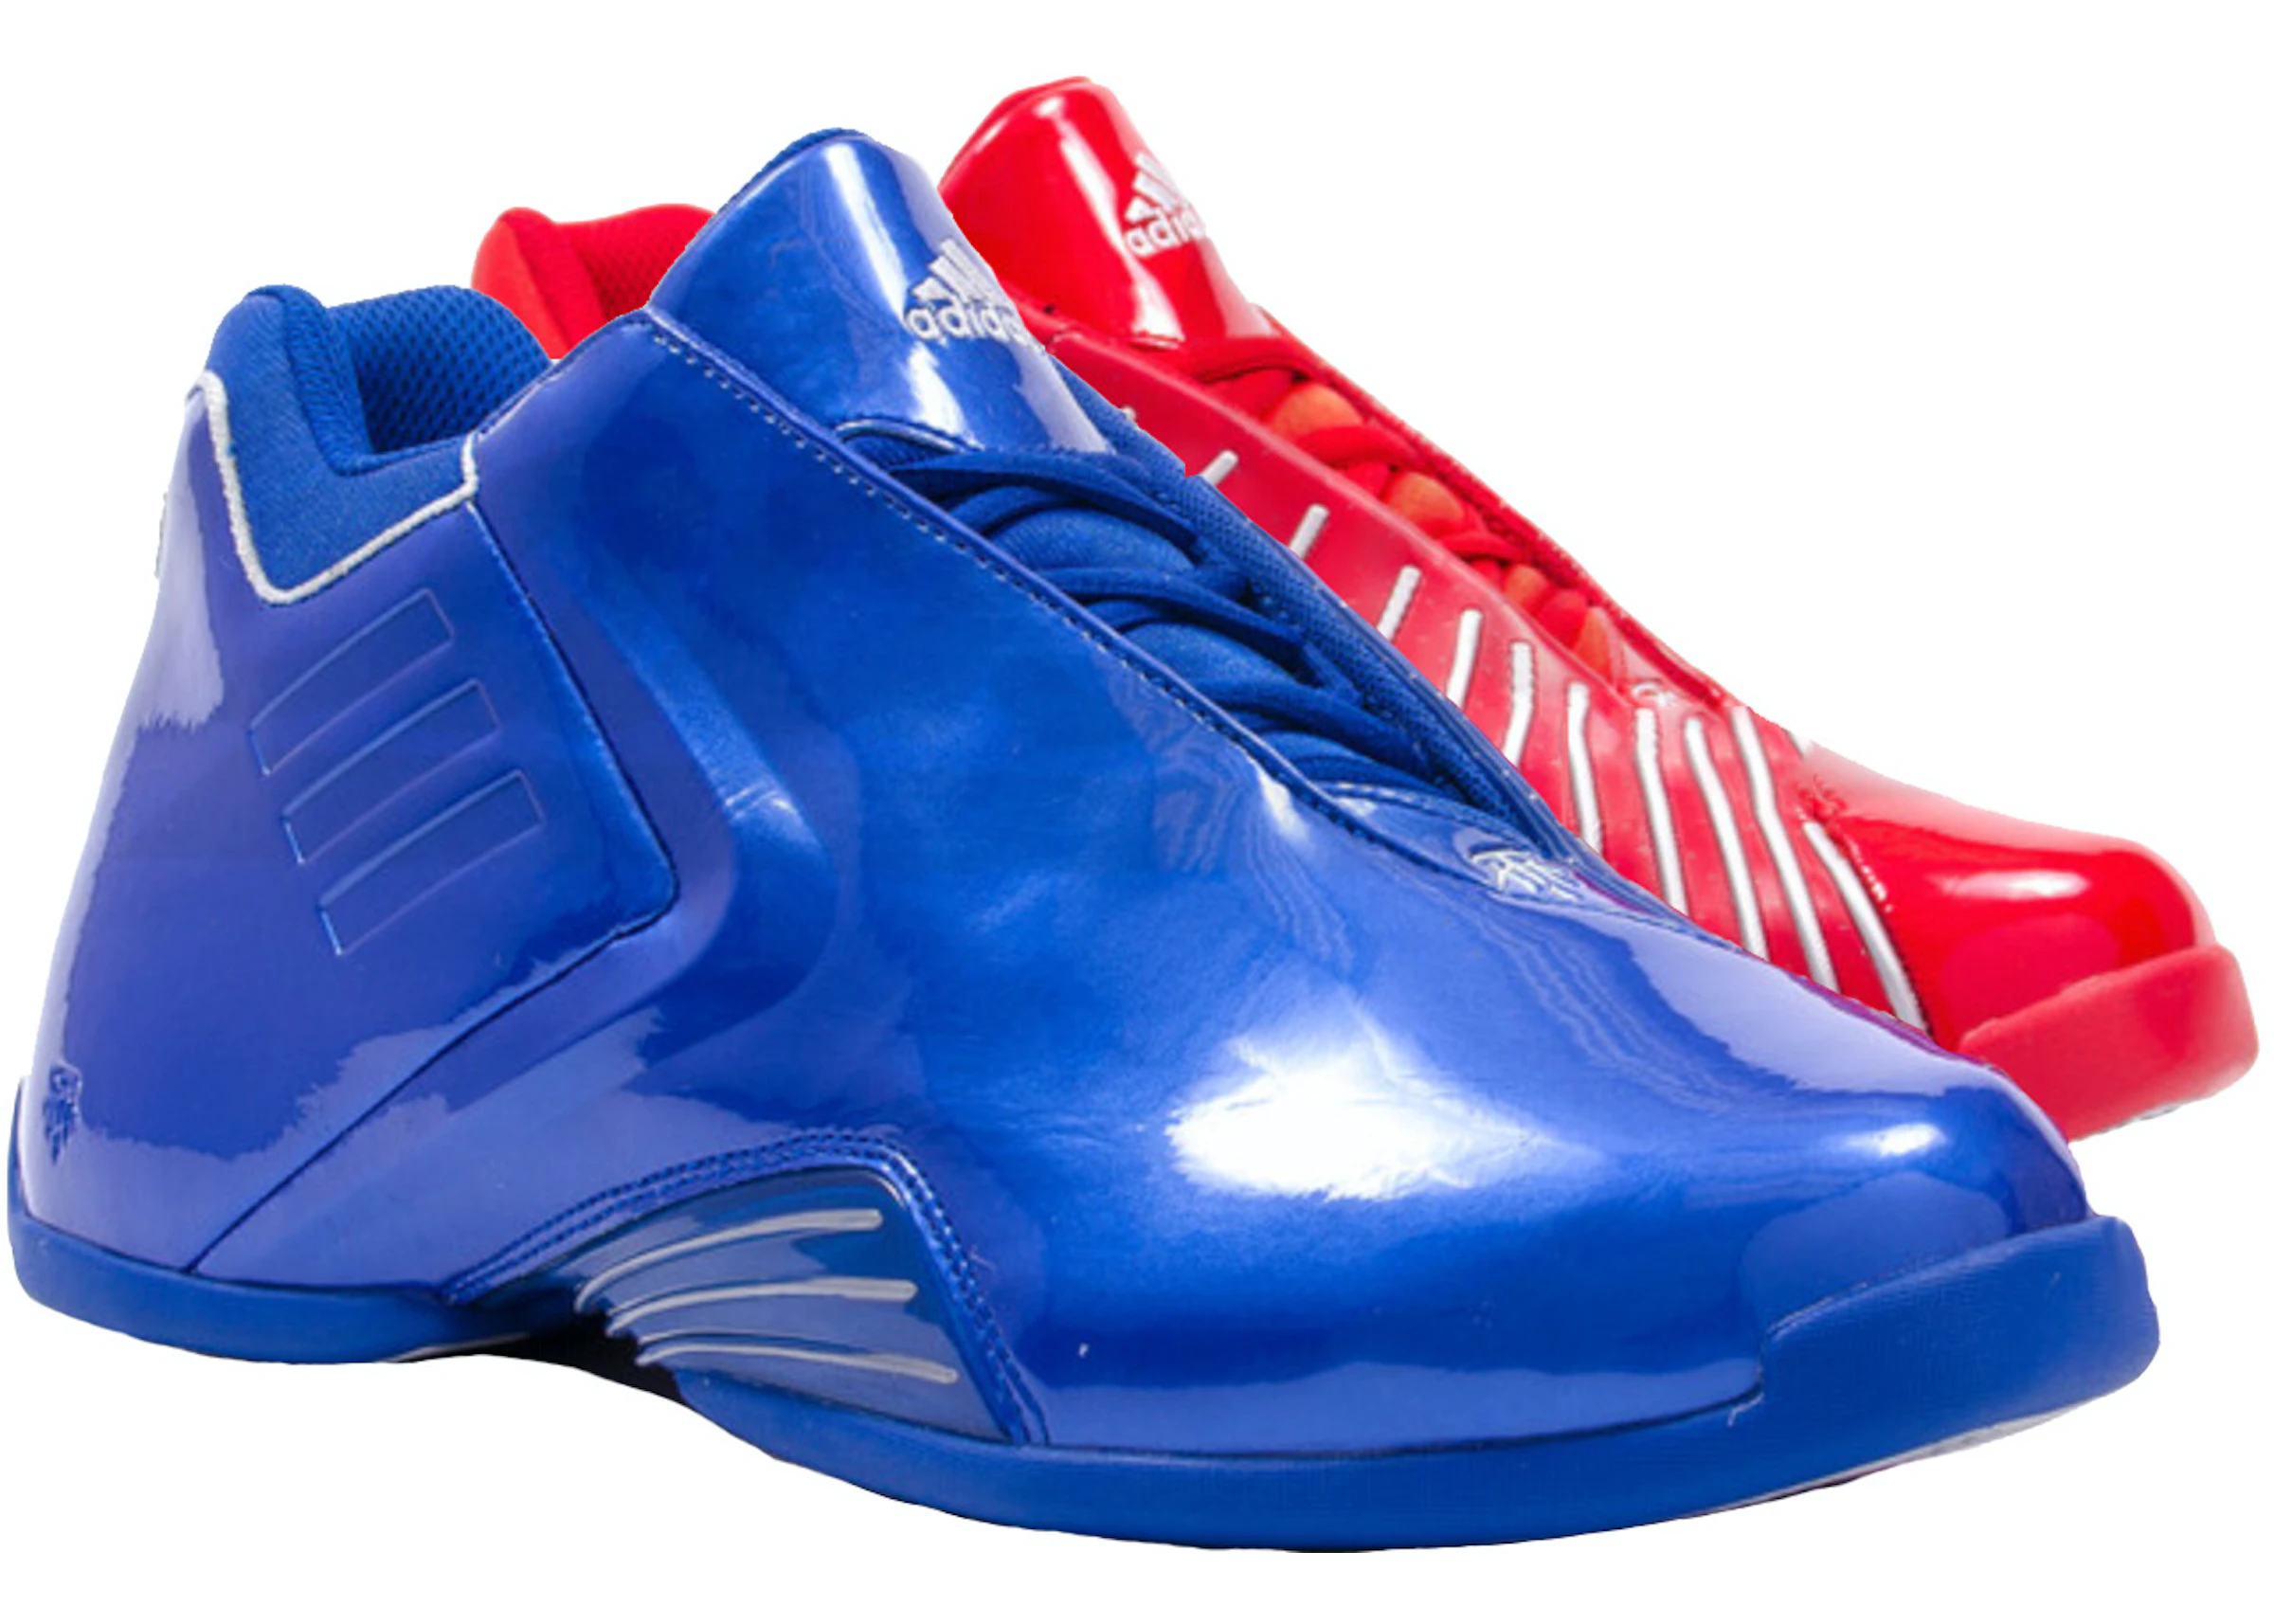 badminton exception Antibiotics adidas TMAC 3 Packer Shoes 2004 All-Star Game (2014) - D73900 - US